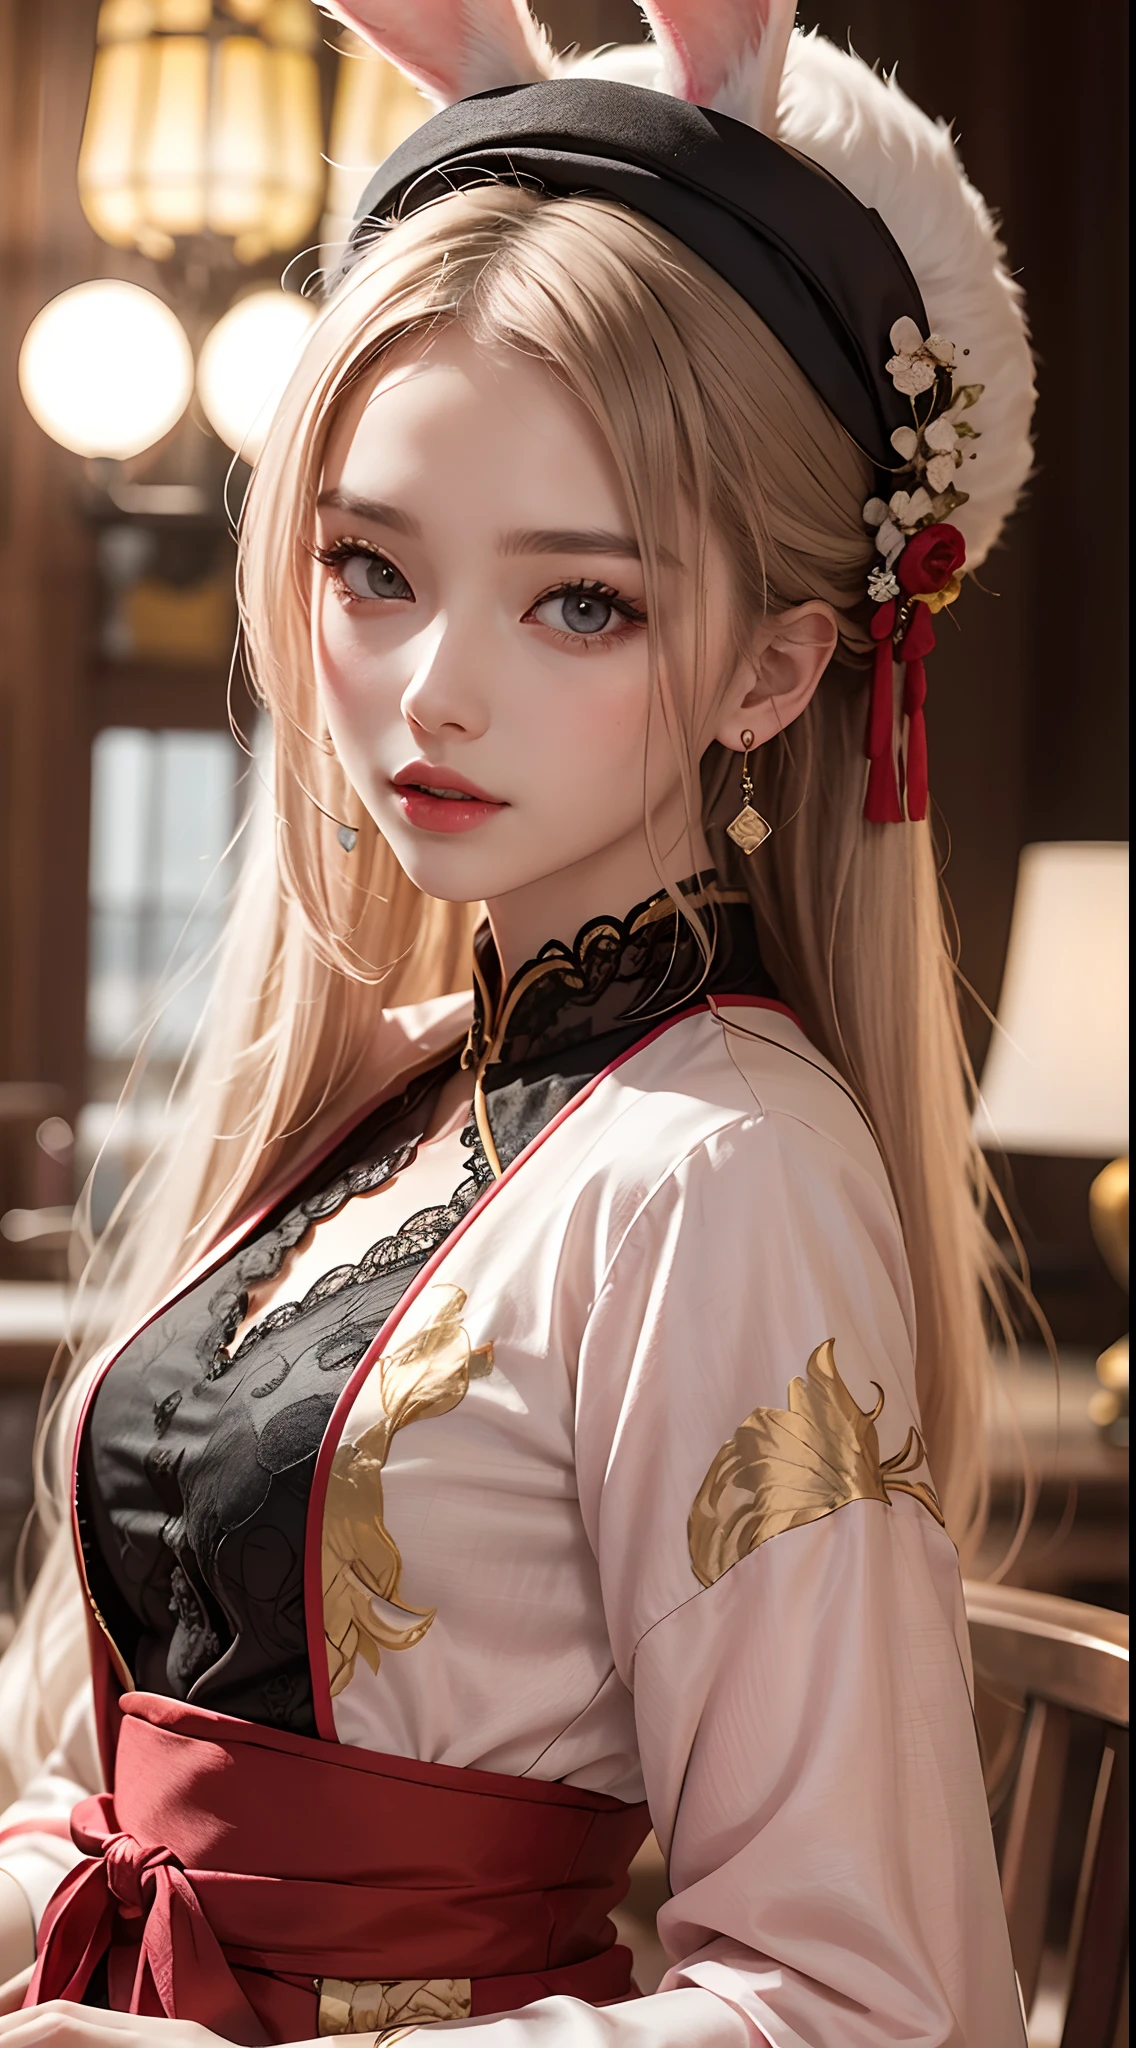 A stunning girl in a traditional hanfu costume, adorned with a thin red silk shirt featuring intricate yellow motifs. Her black lace top adds a touch of elegance to her outfit, while her light pink rabbit ears add a playful element. Her long hair is dyed a pale purple platinum, and is adorned with beautiful hair jewelry. Her pretty face is accentuated by her perfect features, and her earring jewelry adds a final touch of beauty.